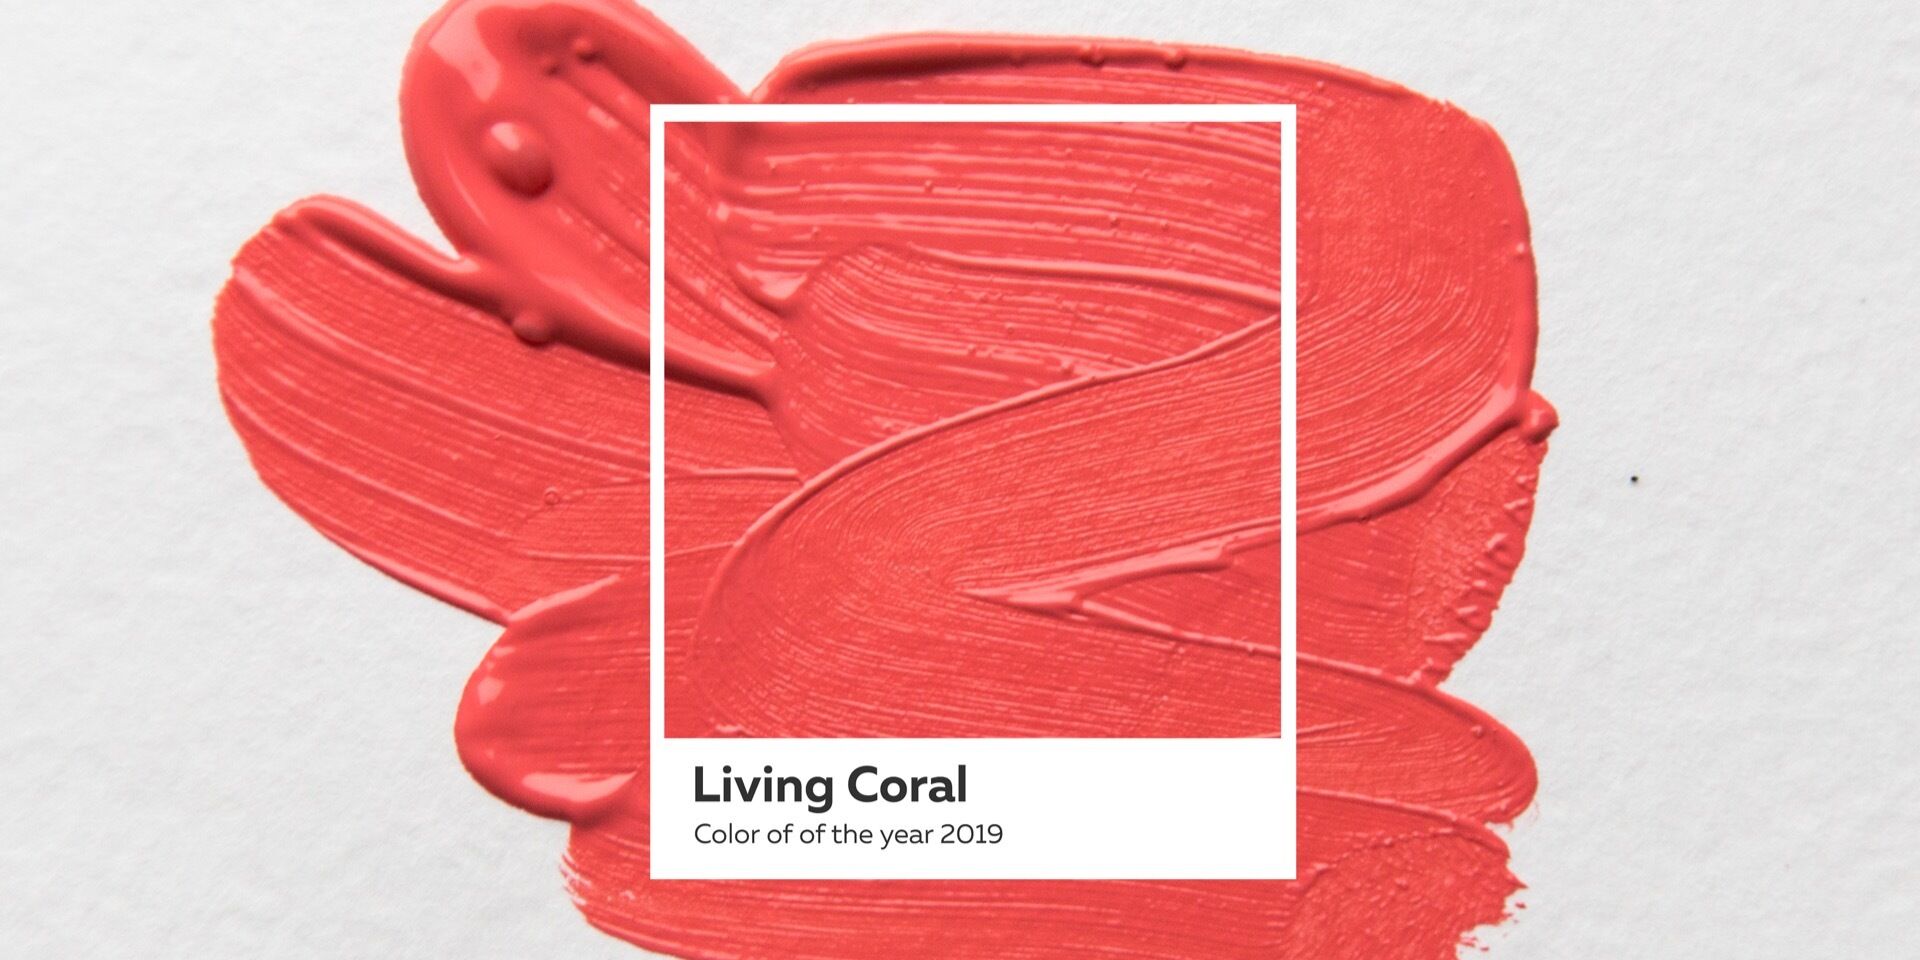 Color of the year 2019 – Living Coral